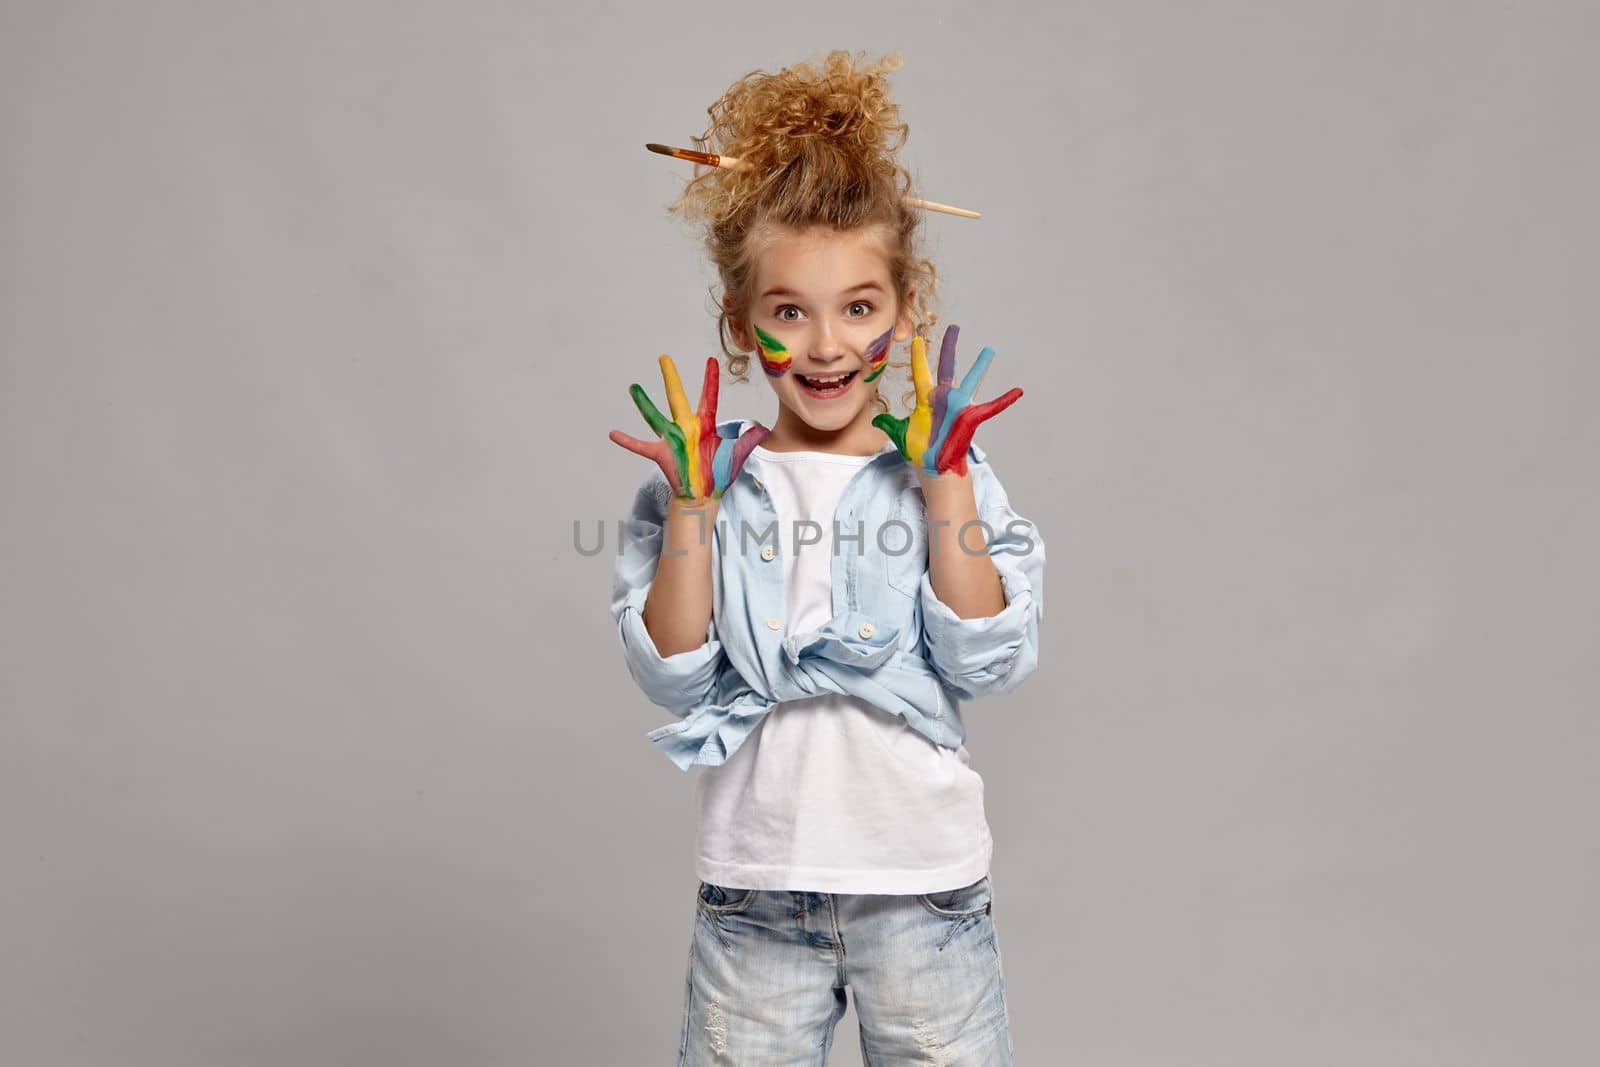 Lovely child having a brush in her chic hairstyle, wearing in a blue shirt and white t-shirt. She raised her painted hands up, looking at the camera and smiling widely, on a gray background.